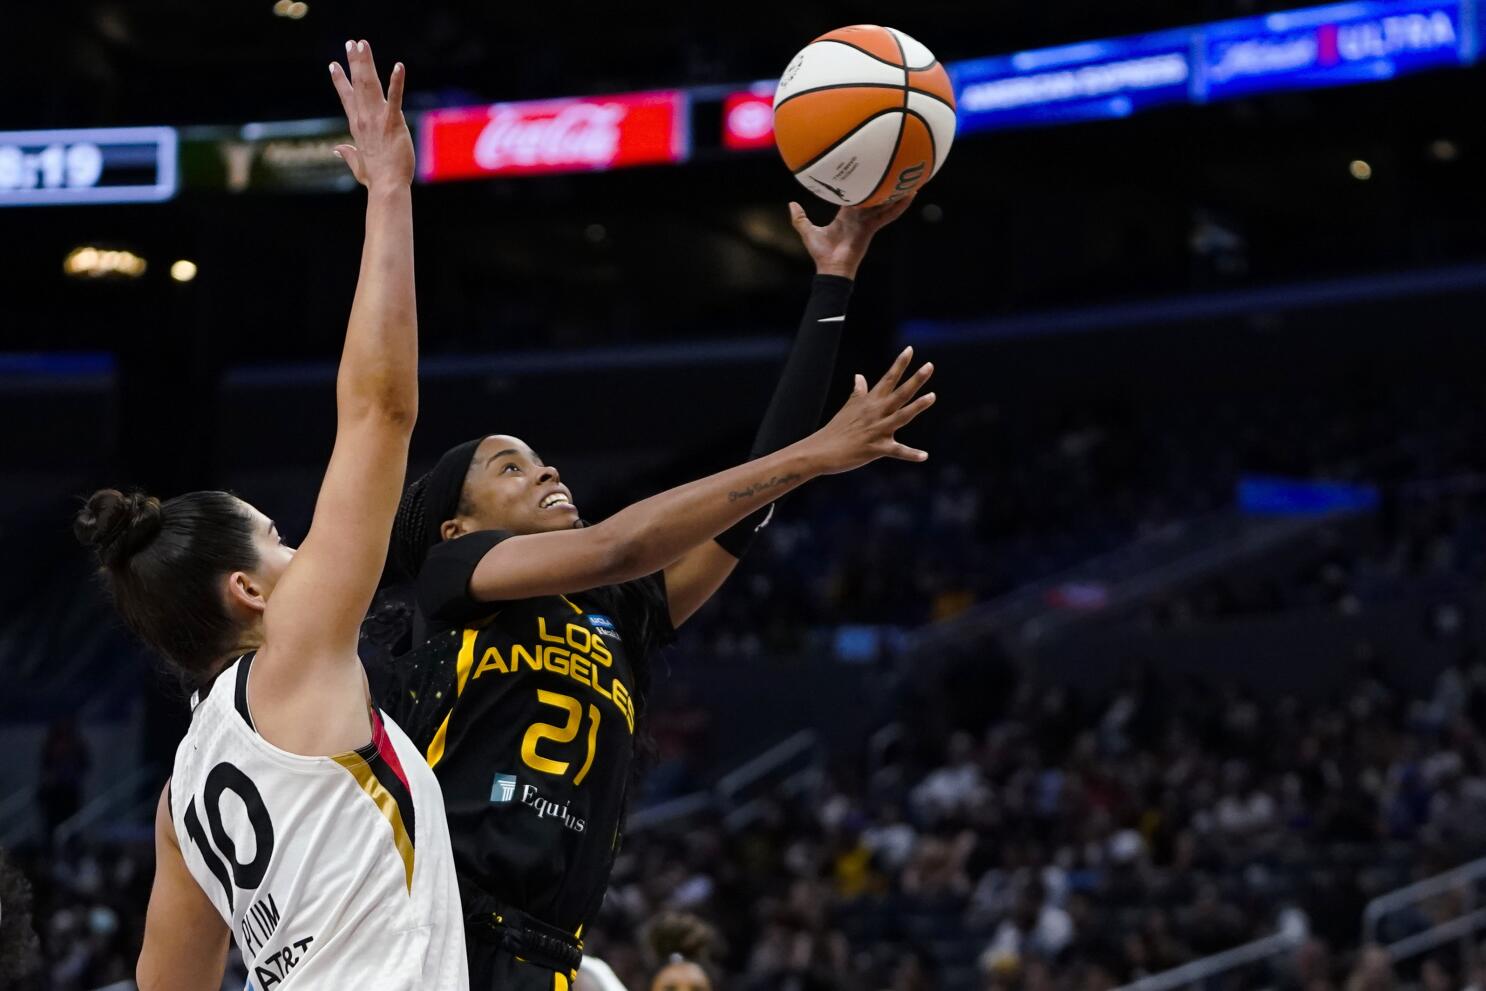 Chiney Ogwumike (13 Los Angeles Sparks) attempts a layup during the WNBA  basketball game between the Chicago Sky and Los Angeles Sparks on Friday  May 6th, 2022 at Wintrust Arena, Chicago, USA. (